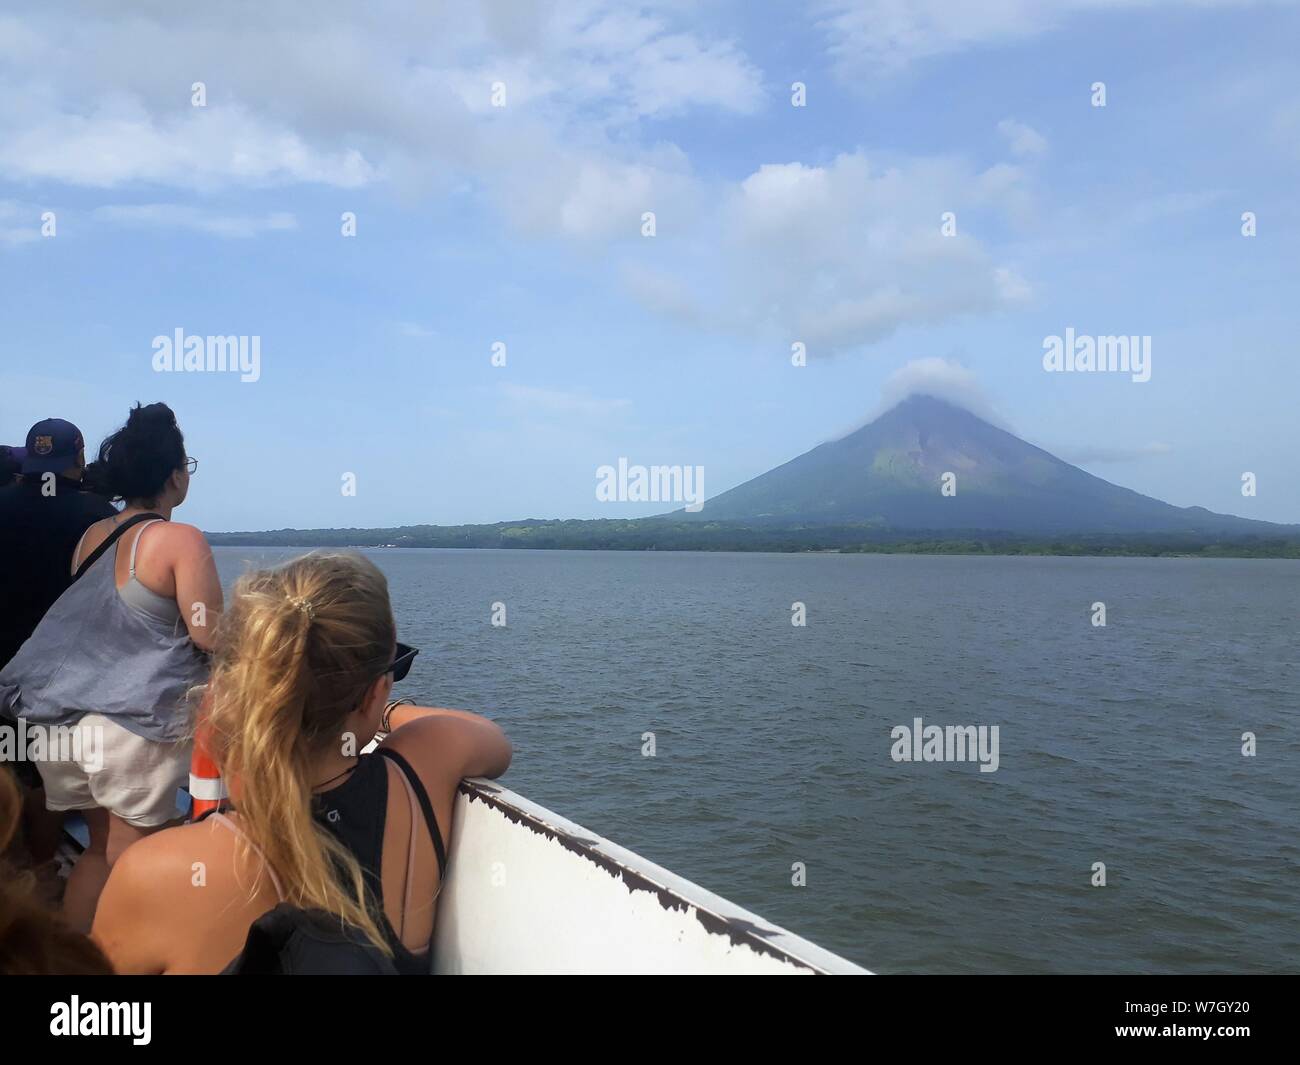 Boat to Ometepe, Nicaragua. Concepción Volcan, Lake Nicaragua. Looking at and taking photos of the island and the volcano. Stock Photo